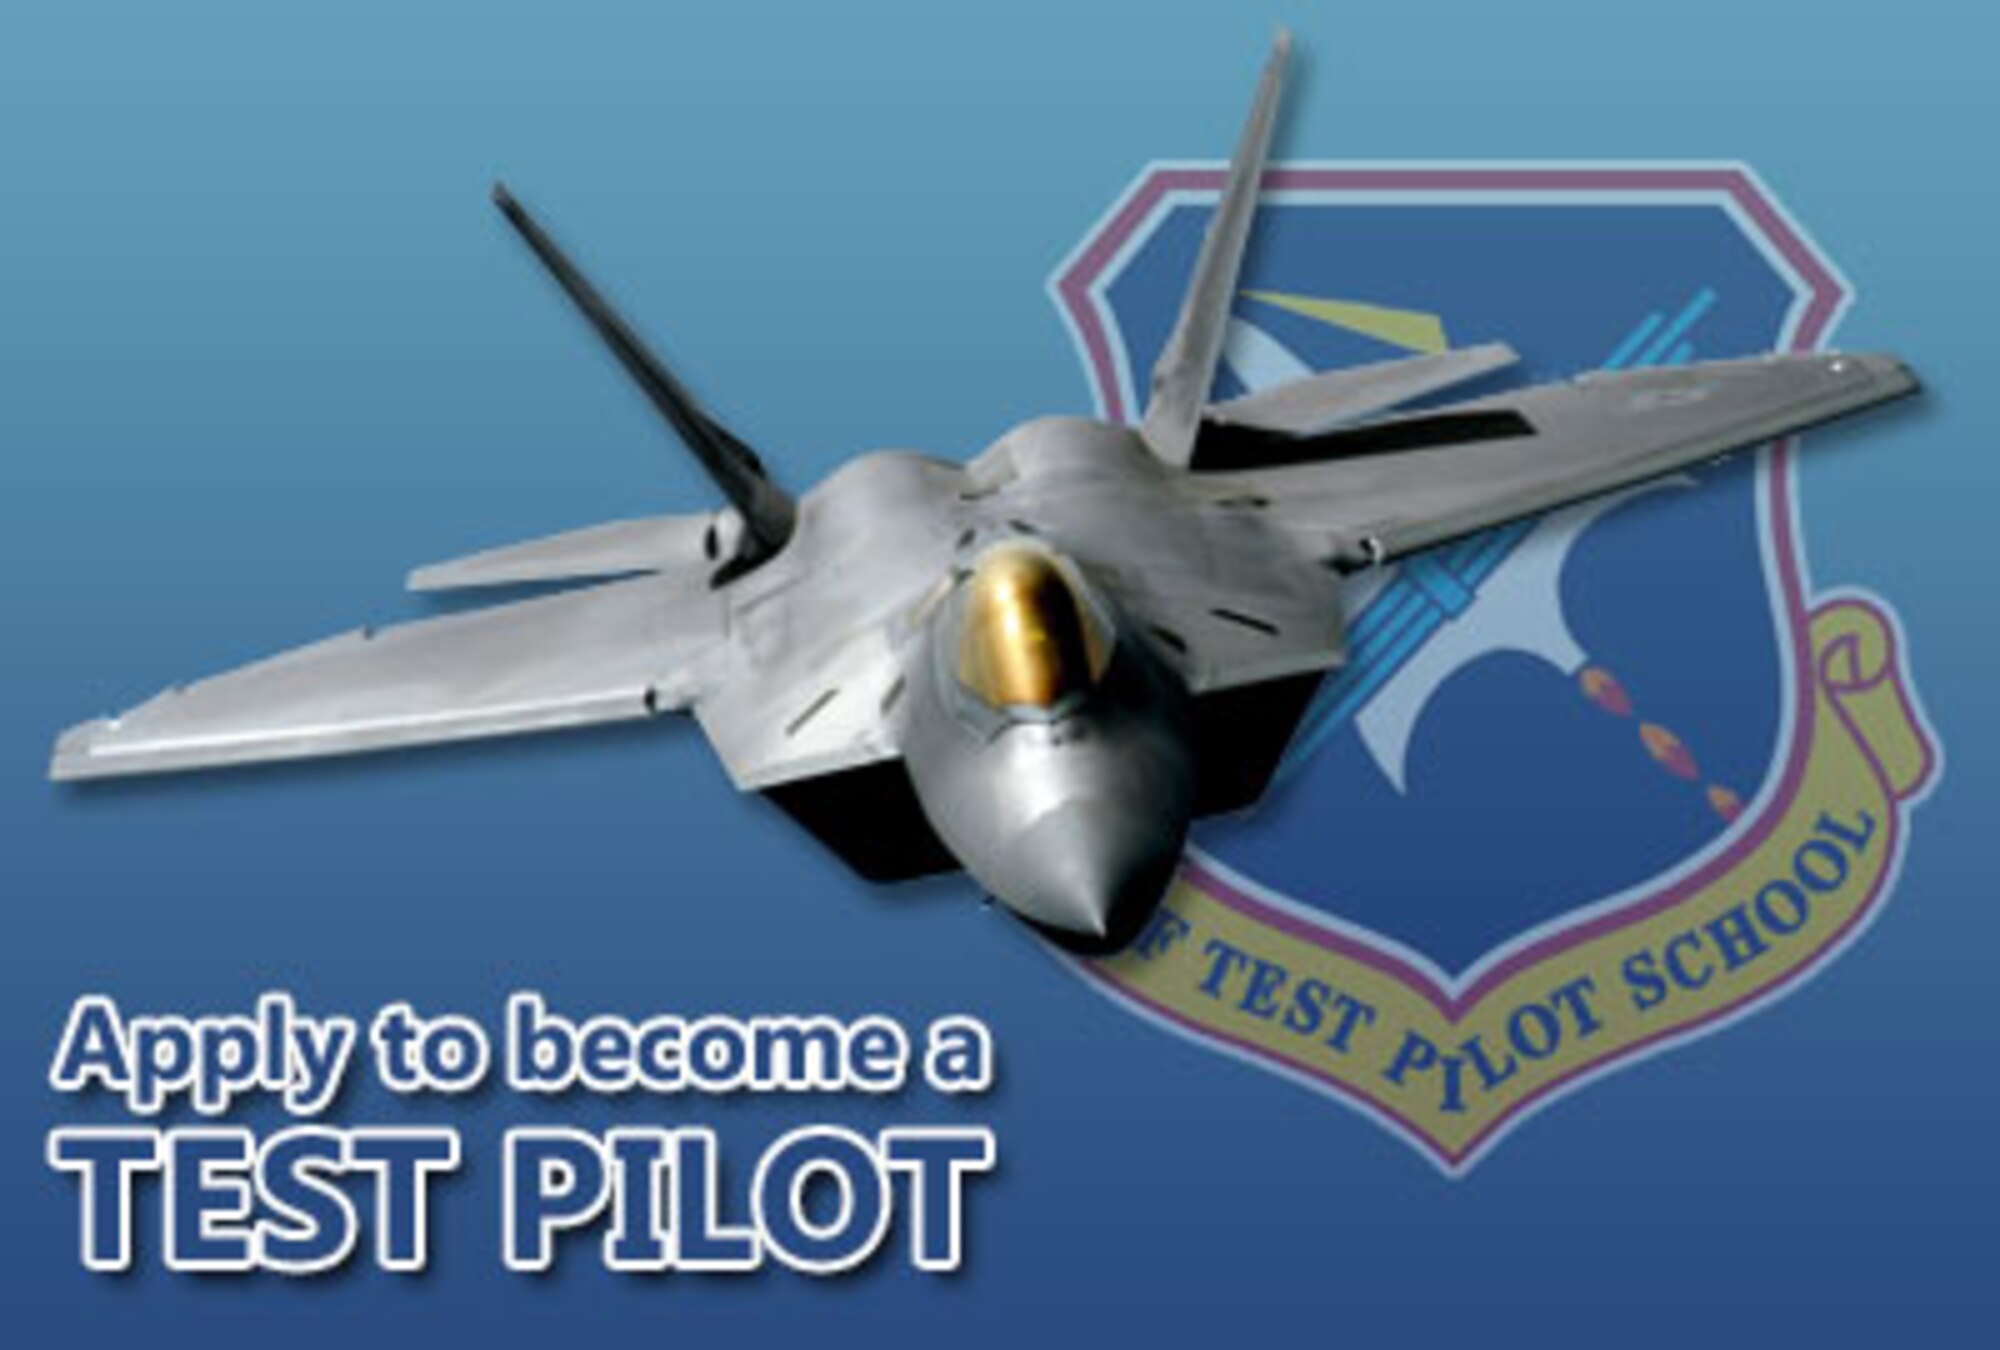 The next annual Air Force test pilot school selection board will convene Sep. 28-Oct. 2 at the Air Force Personnel Center here for classes beginning in July 2010 and July 2011. Officers interested in applying should submit their applications to AFPC by Aug. 14, 2009. 